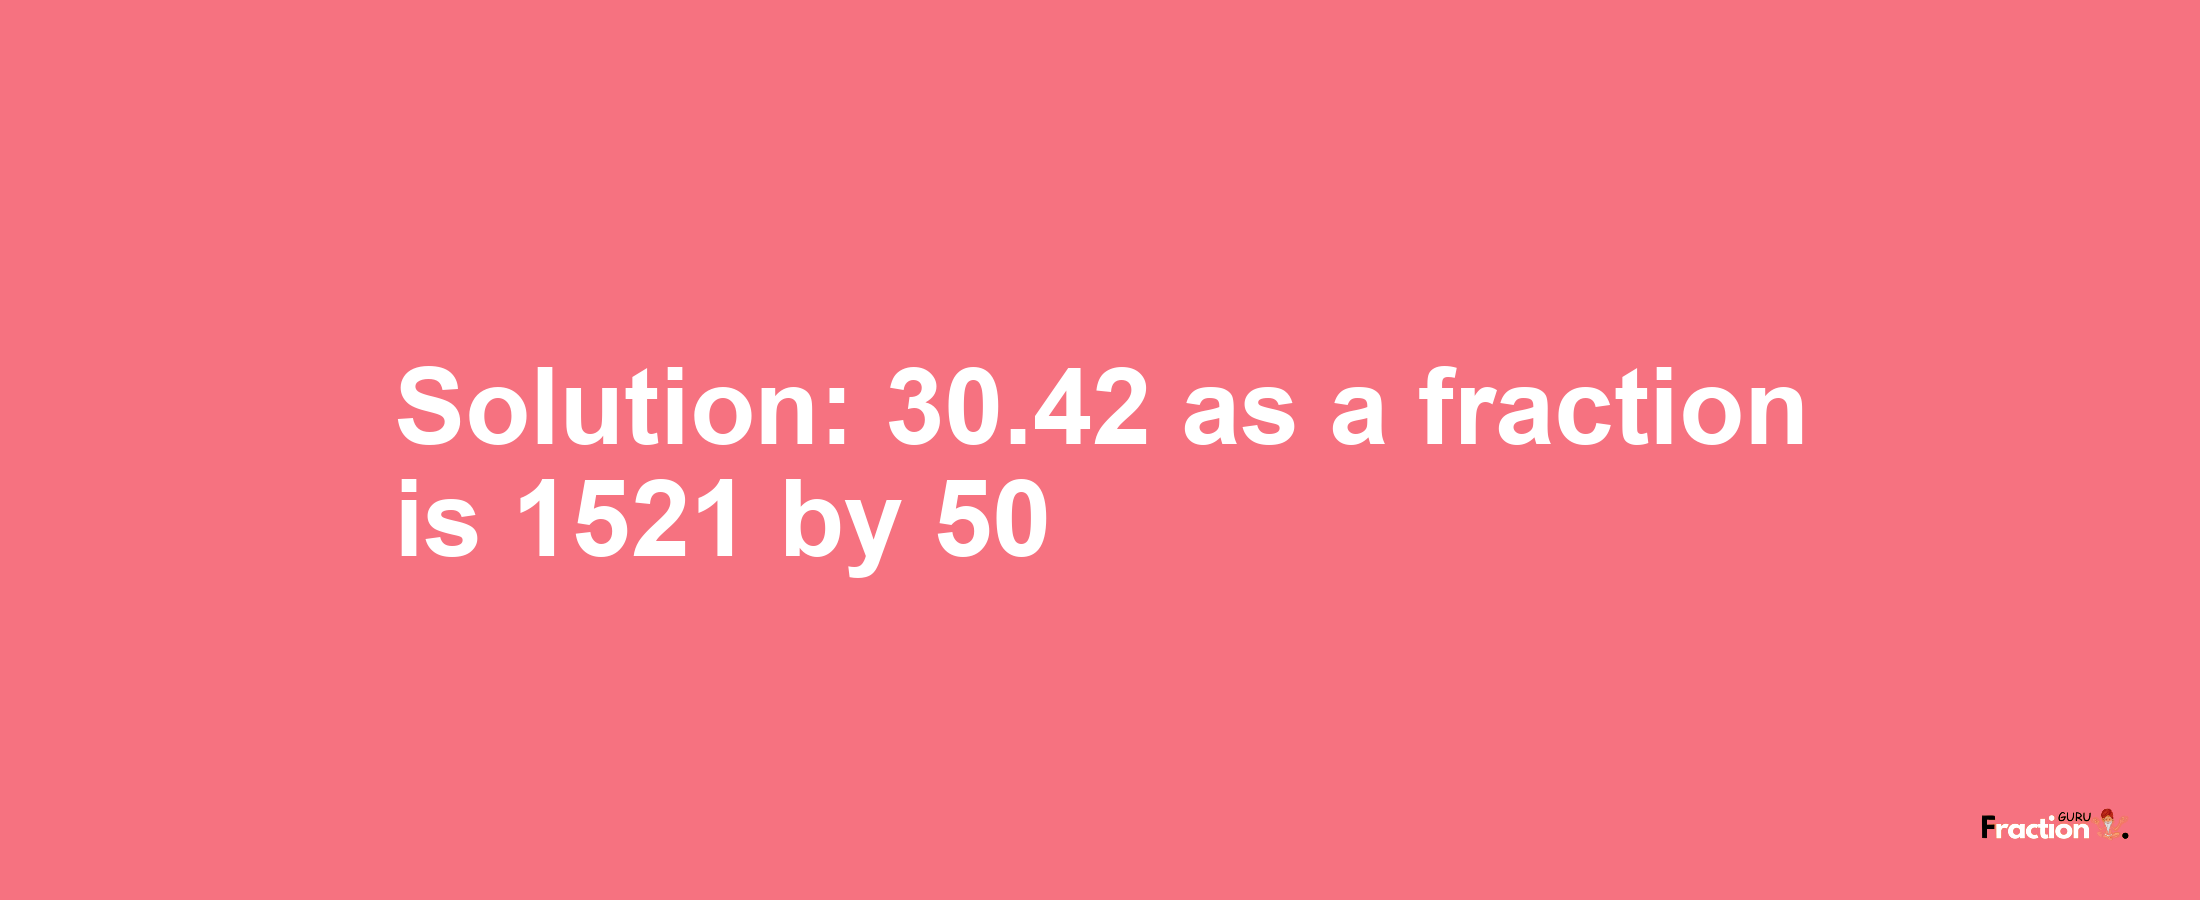 Solution:30.42 as a fraction is 1521/50